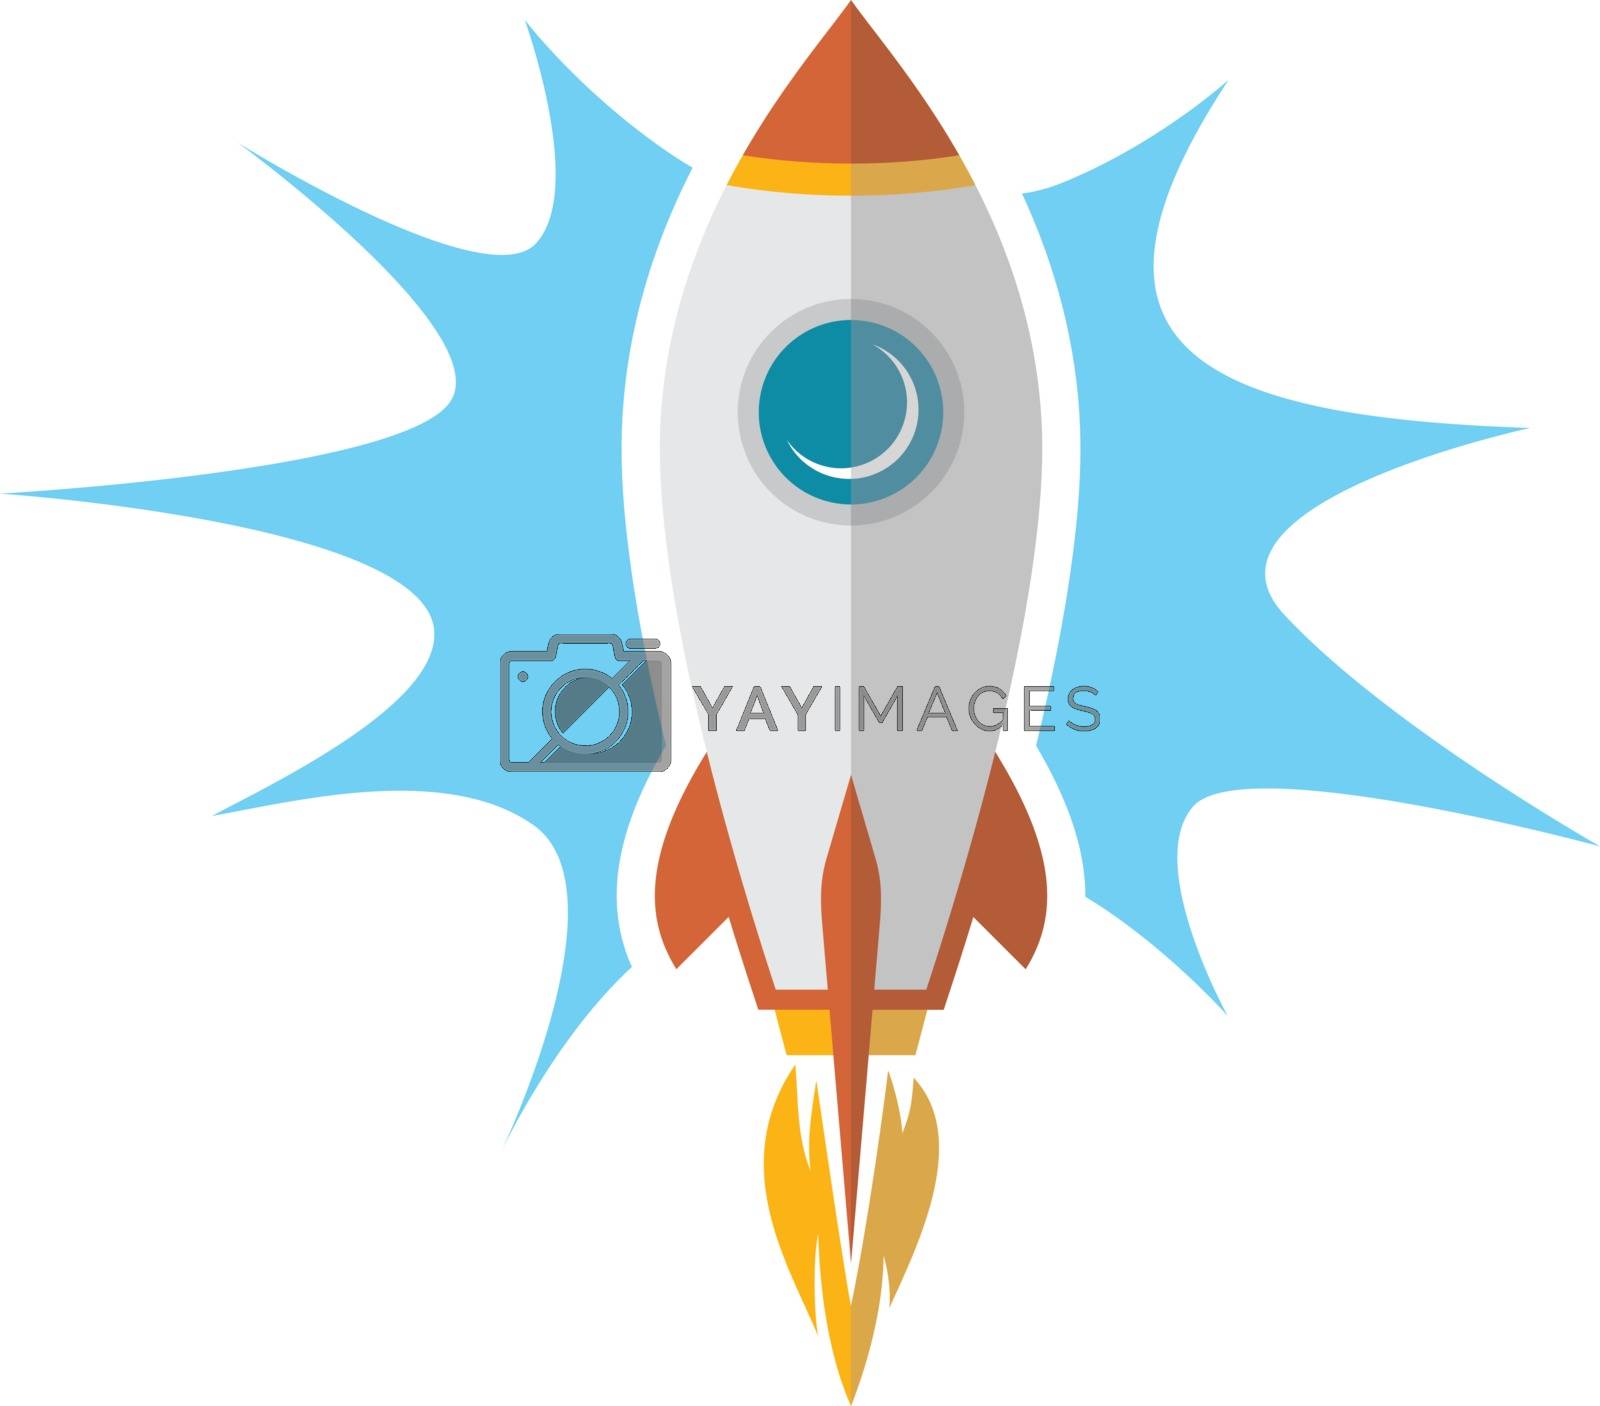 Royalty free image of space travel rocket ship science vector art by vector1st